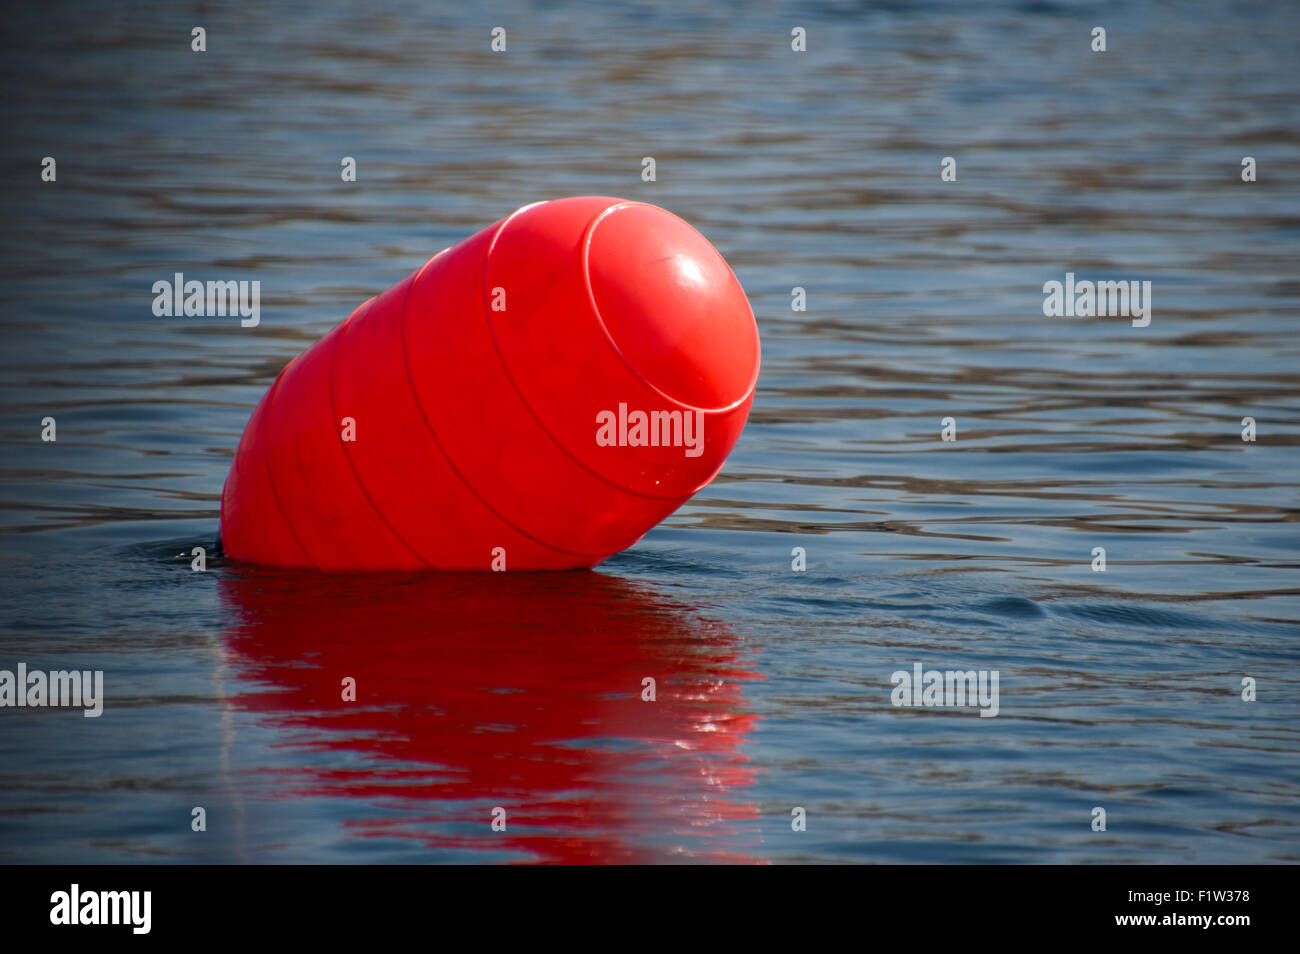 Marker Bouy for Sturgeon Fishing on the Columbia River near The Dalles, Oregon. Stock Photo